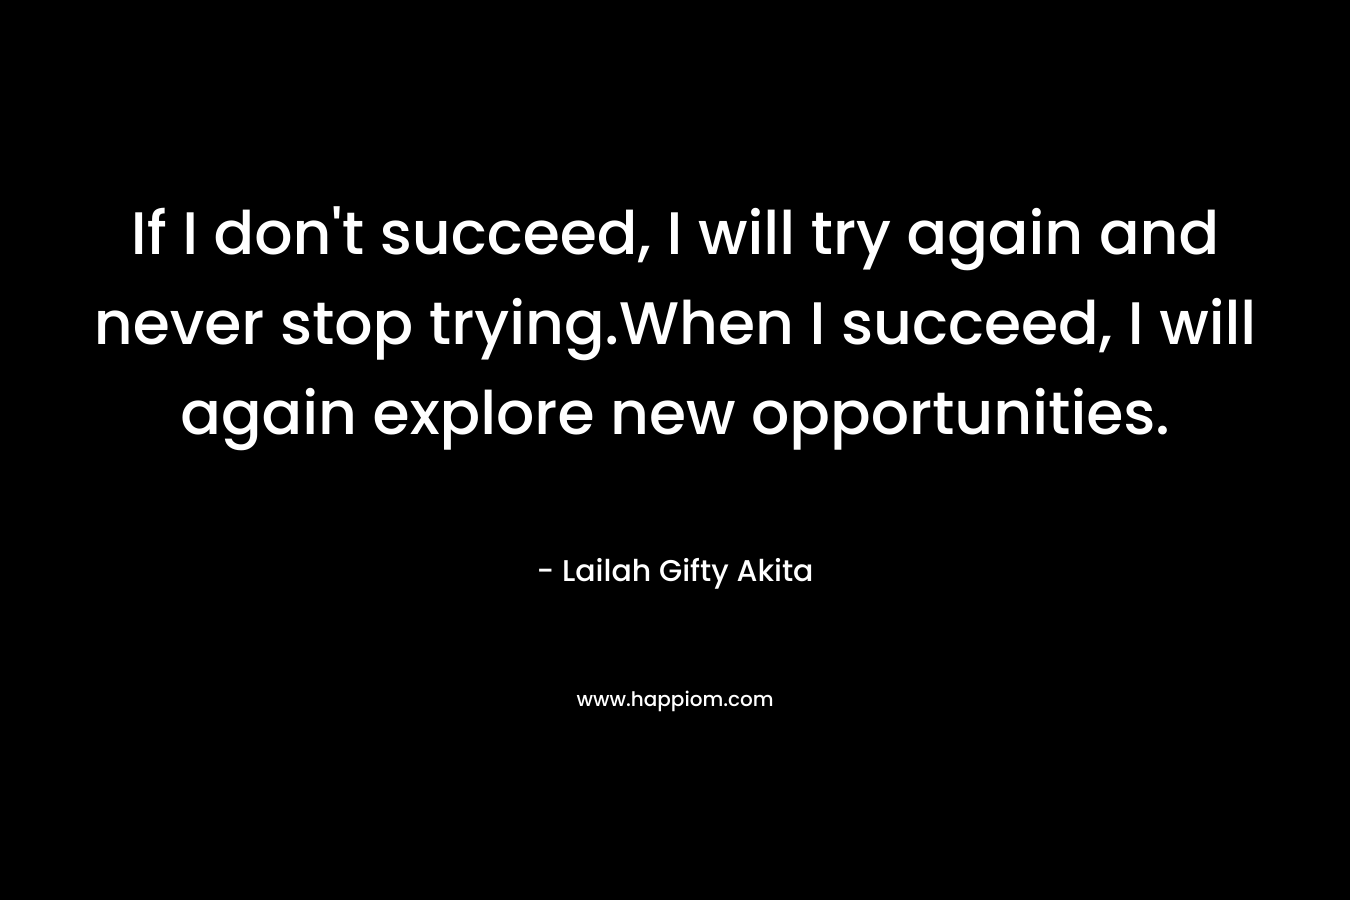 If I don’t succeed, I will try again and never stop trying.When I succeed, I will again explore new opportunities. – Lailah Gifty Akita